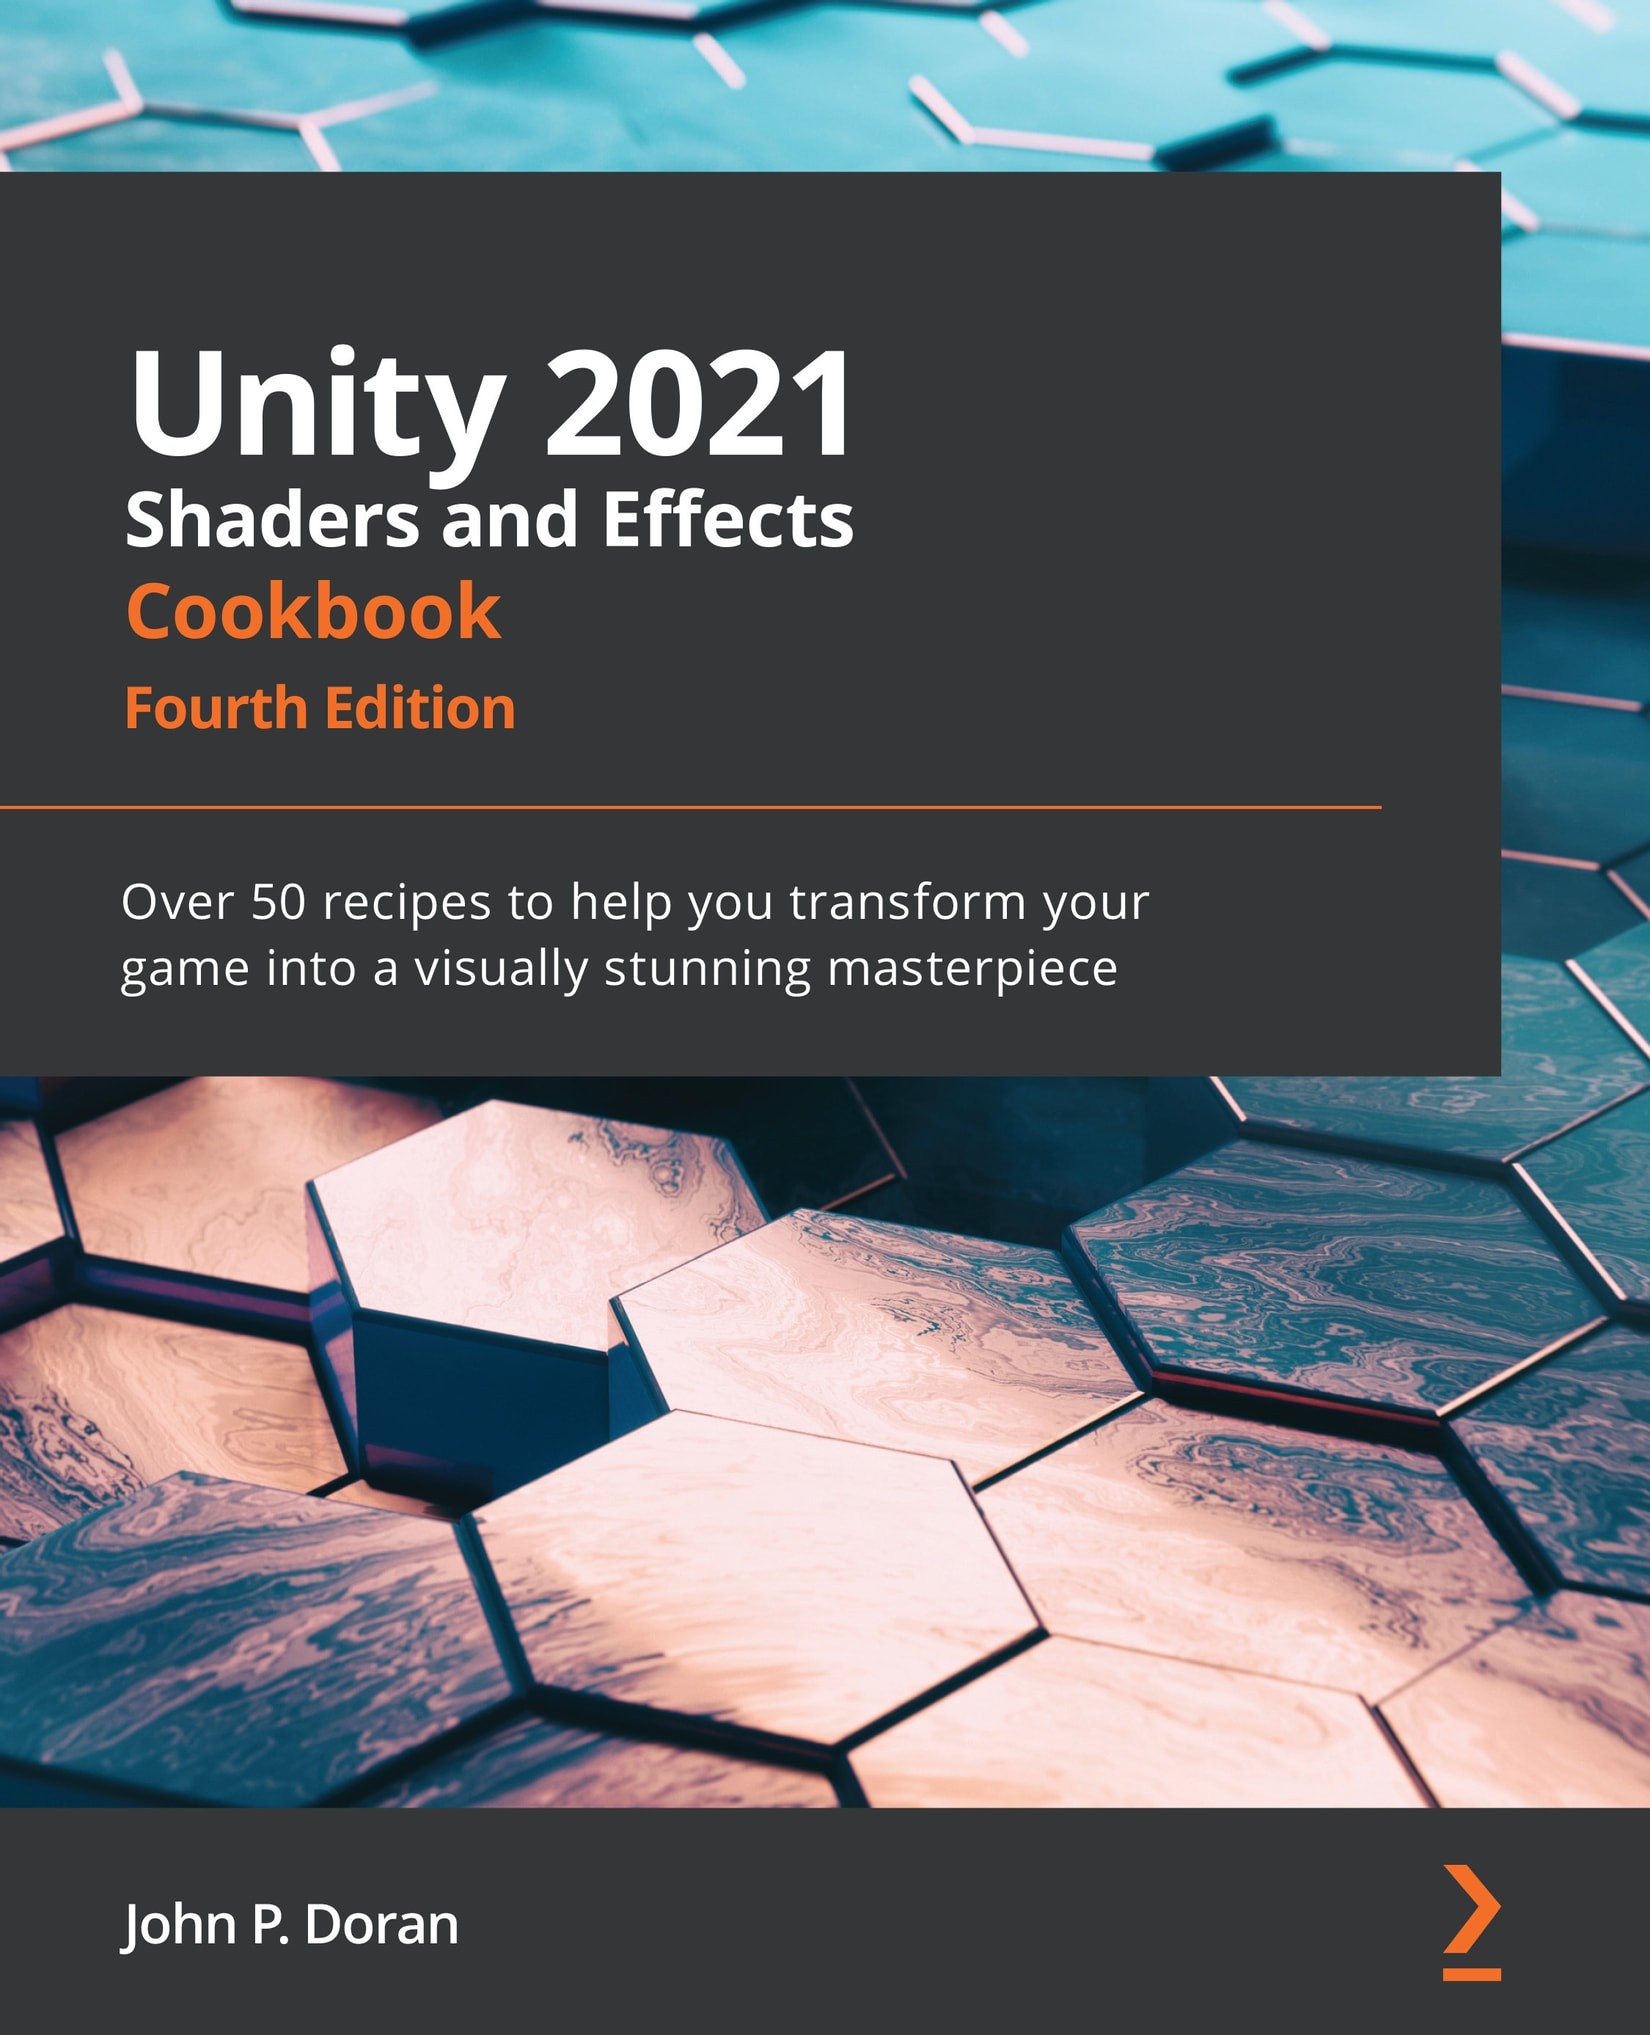 Unity 2021 Shaders and Effects Cookbook - Fourth Edition: Over 50 Recipes to Help You Transform Your Game Into a Visually Stunning Masterpiece